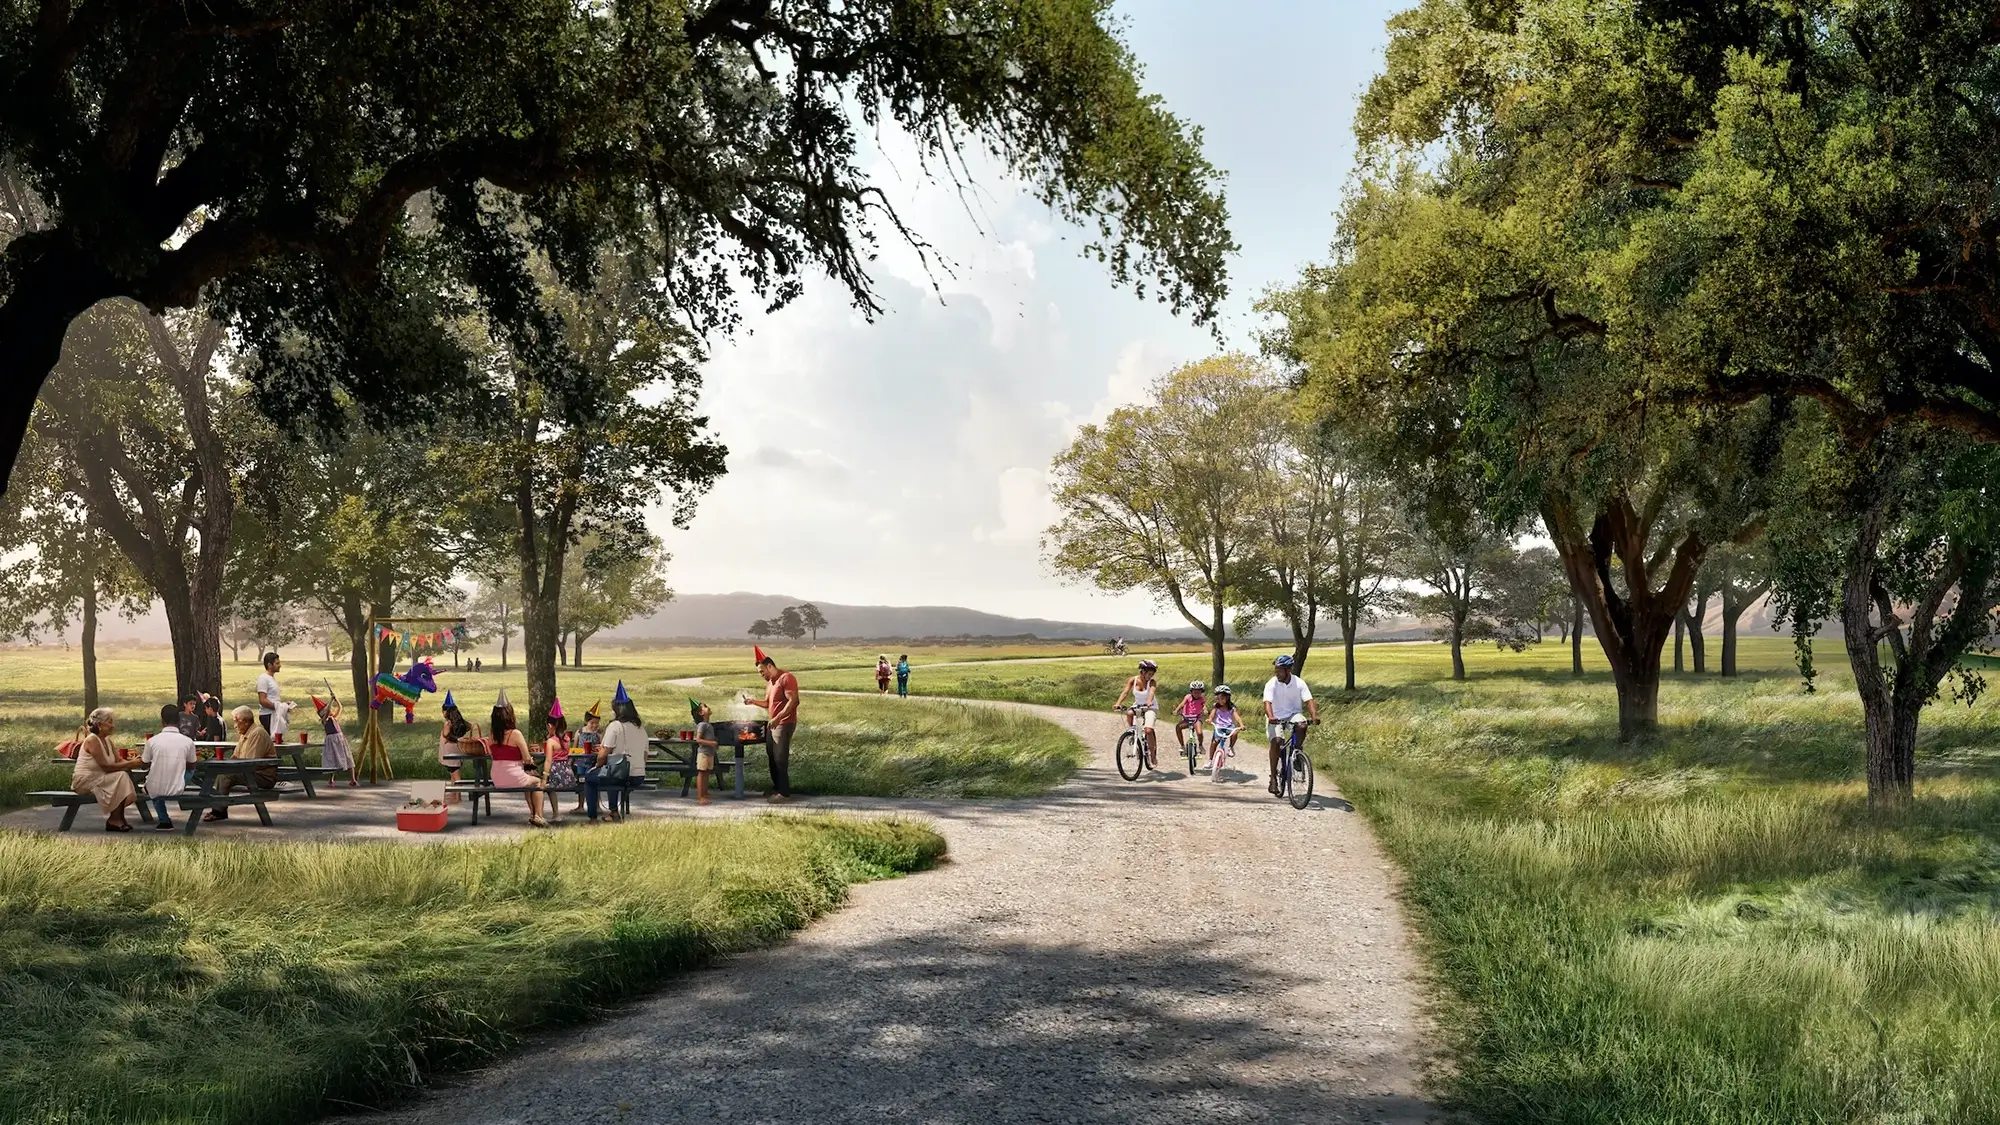 04 Family friendly parks IMAGE CREDIT Designed by SITELAB urban studio CMG